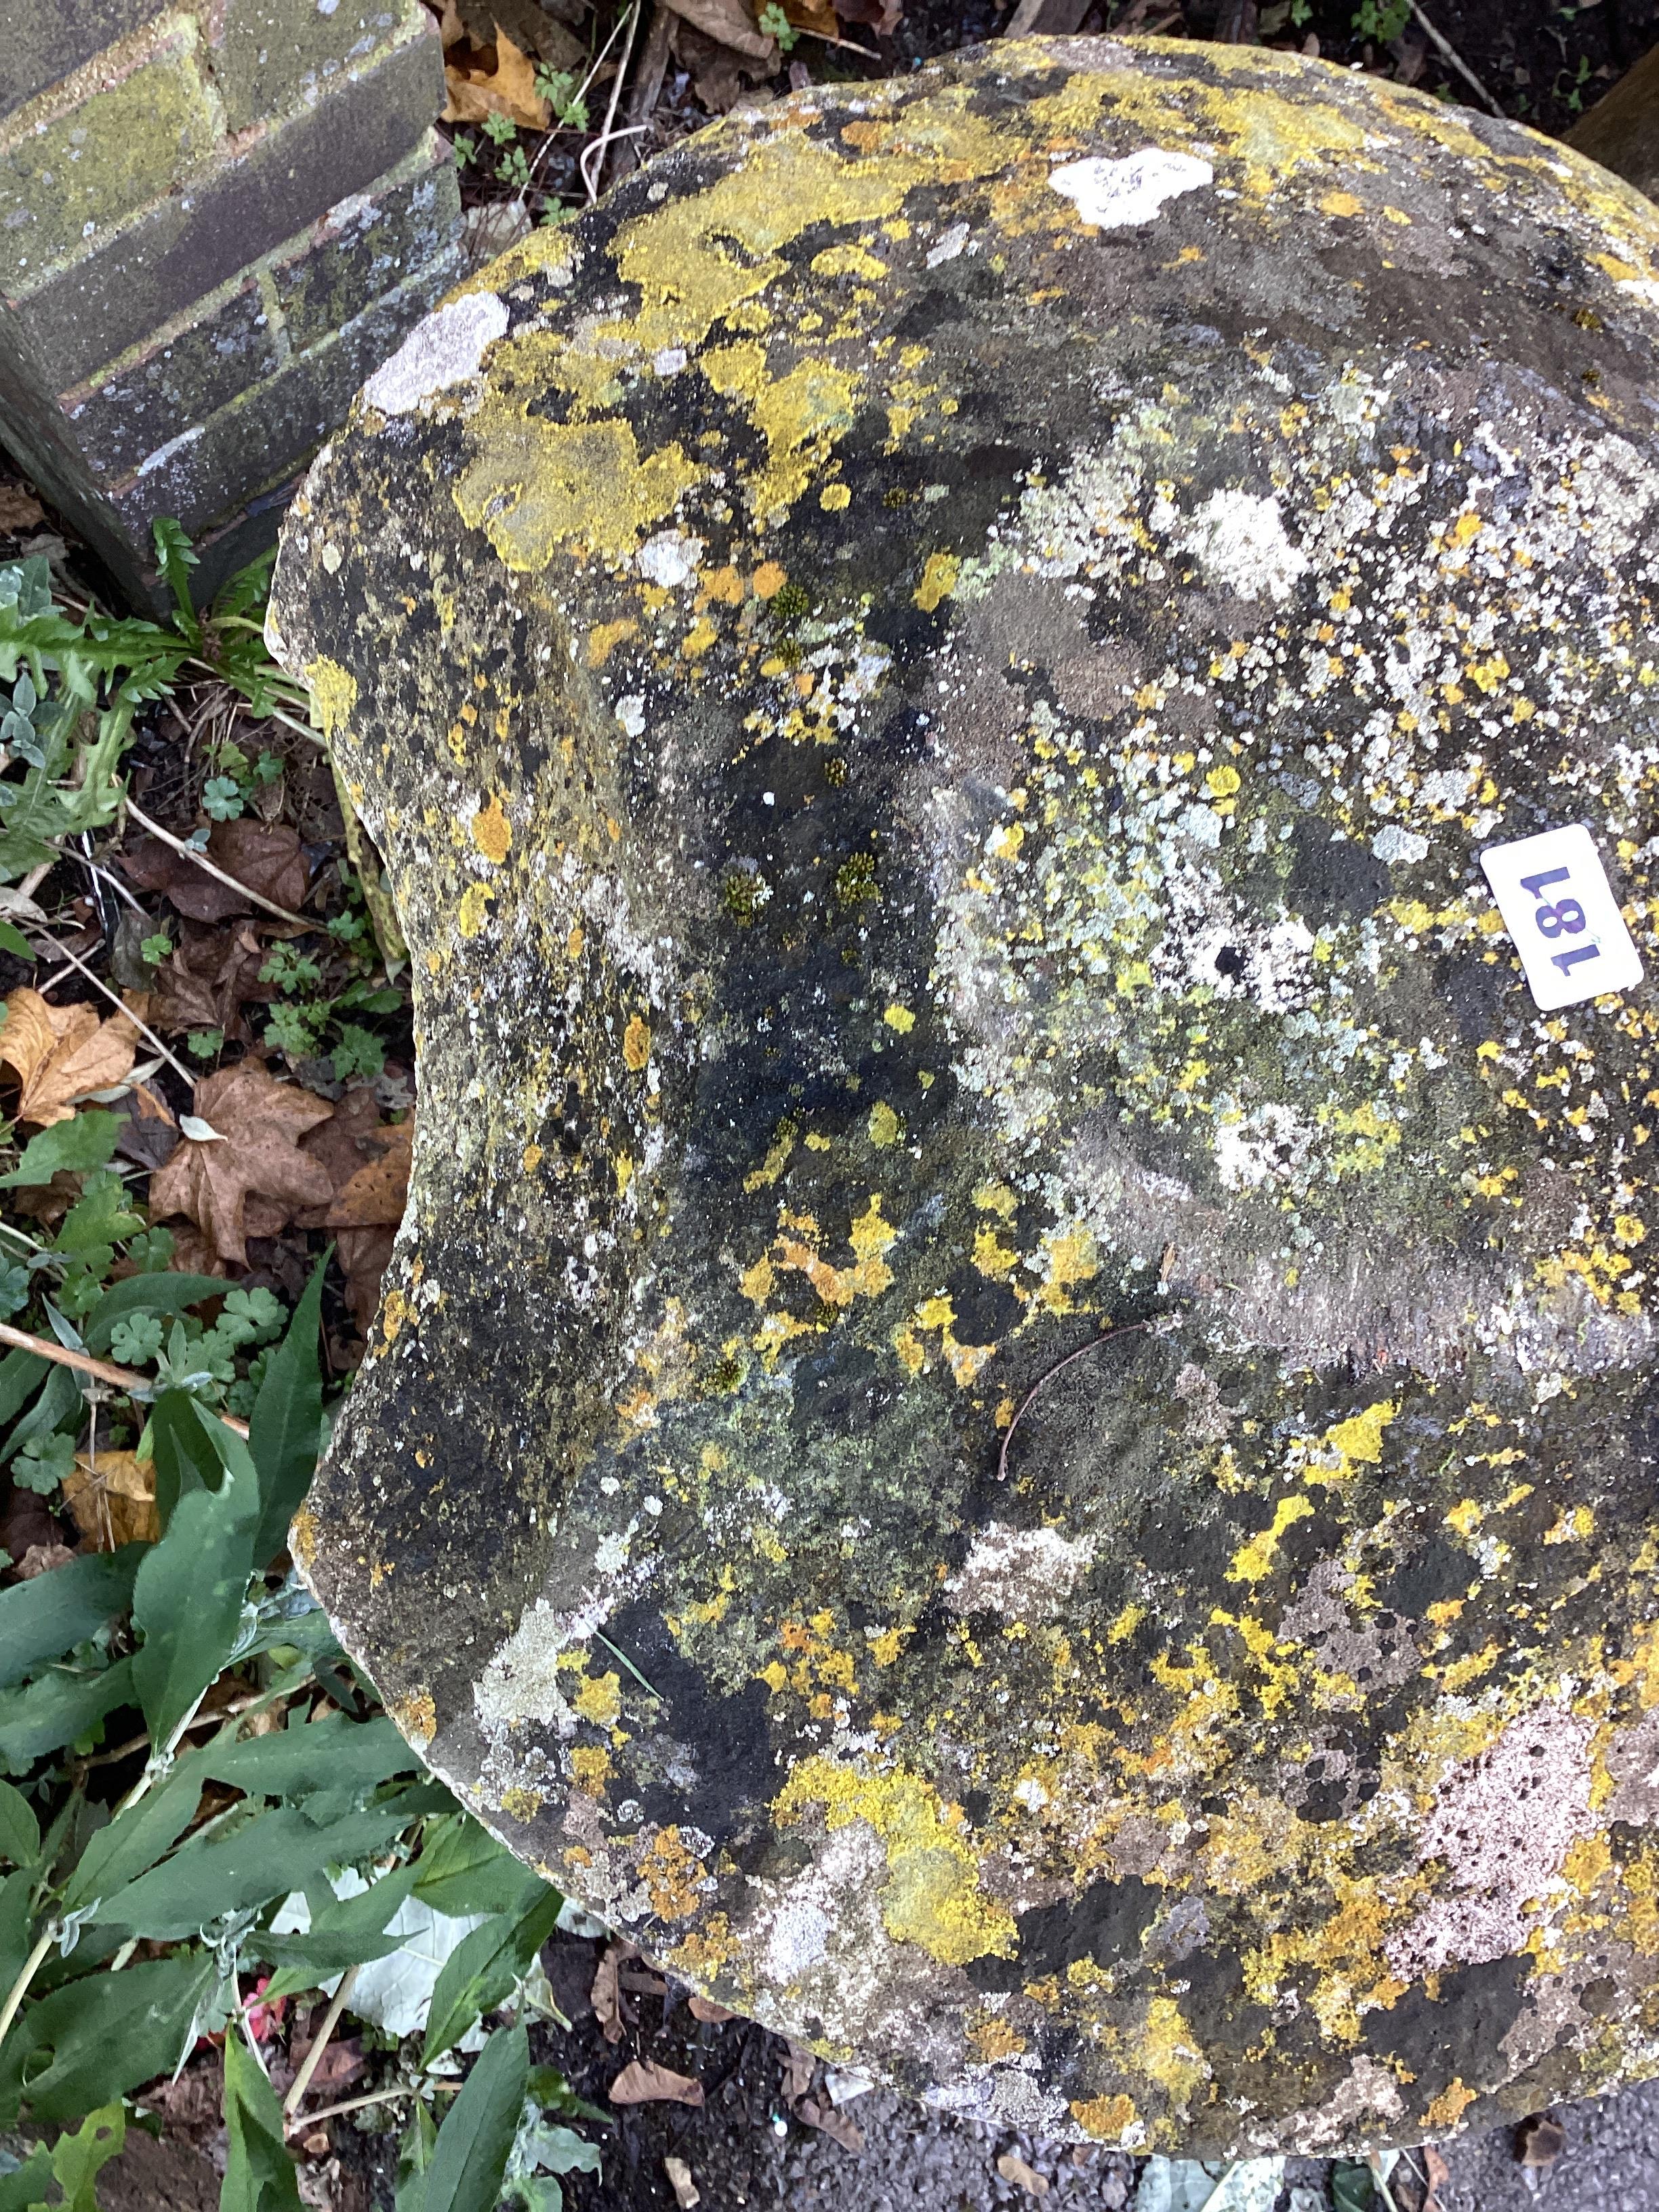 A weathered reconstituted staddle stone, height 77cm